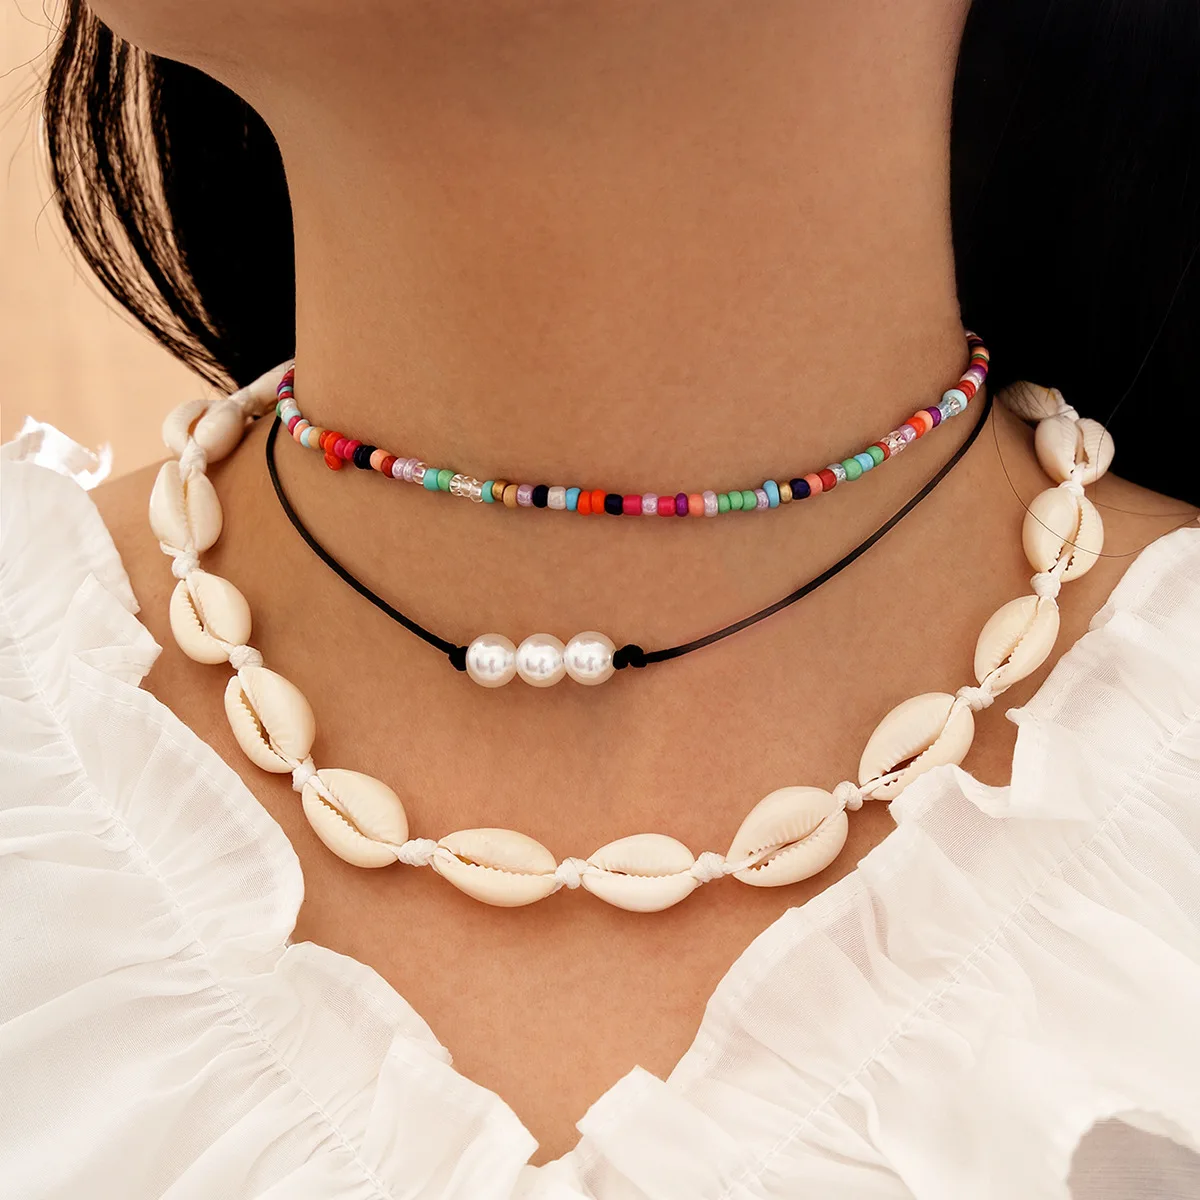 

Bohemia natural freshwater pearl necklace jewelry fashion summer seed beads chain shell layered for women, Picture shows